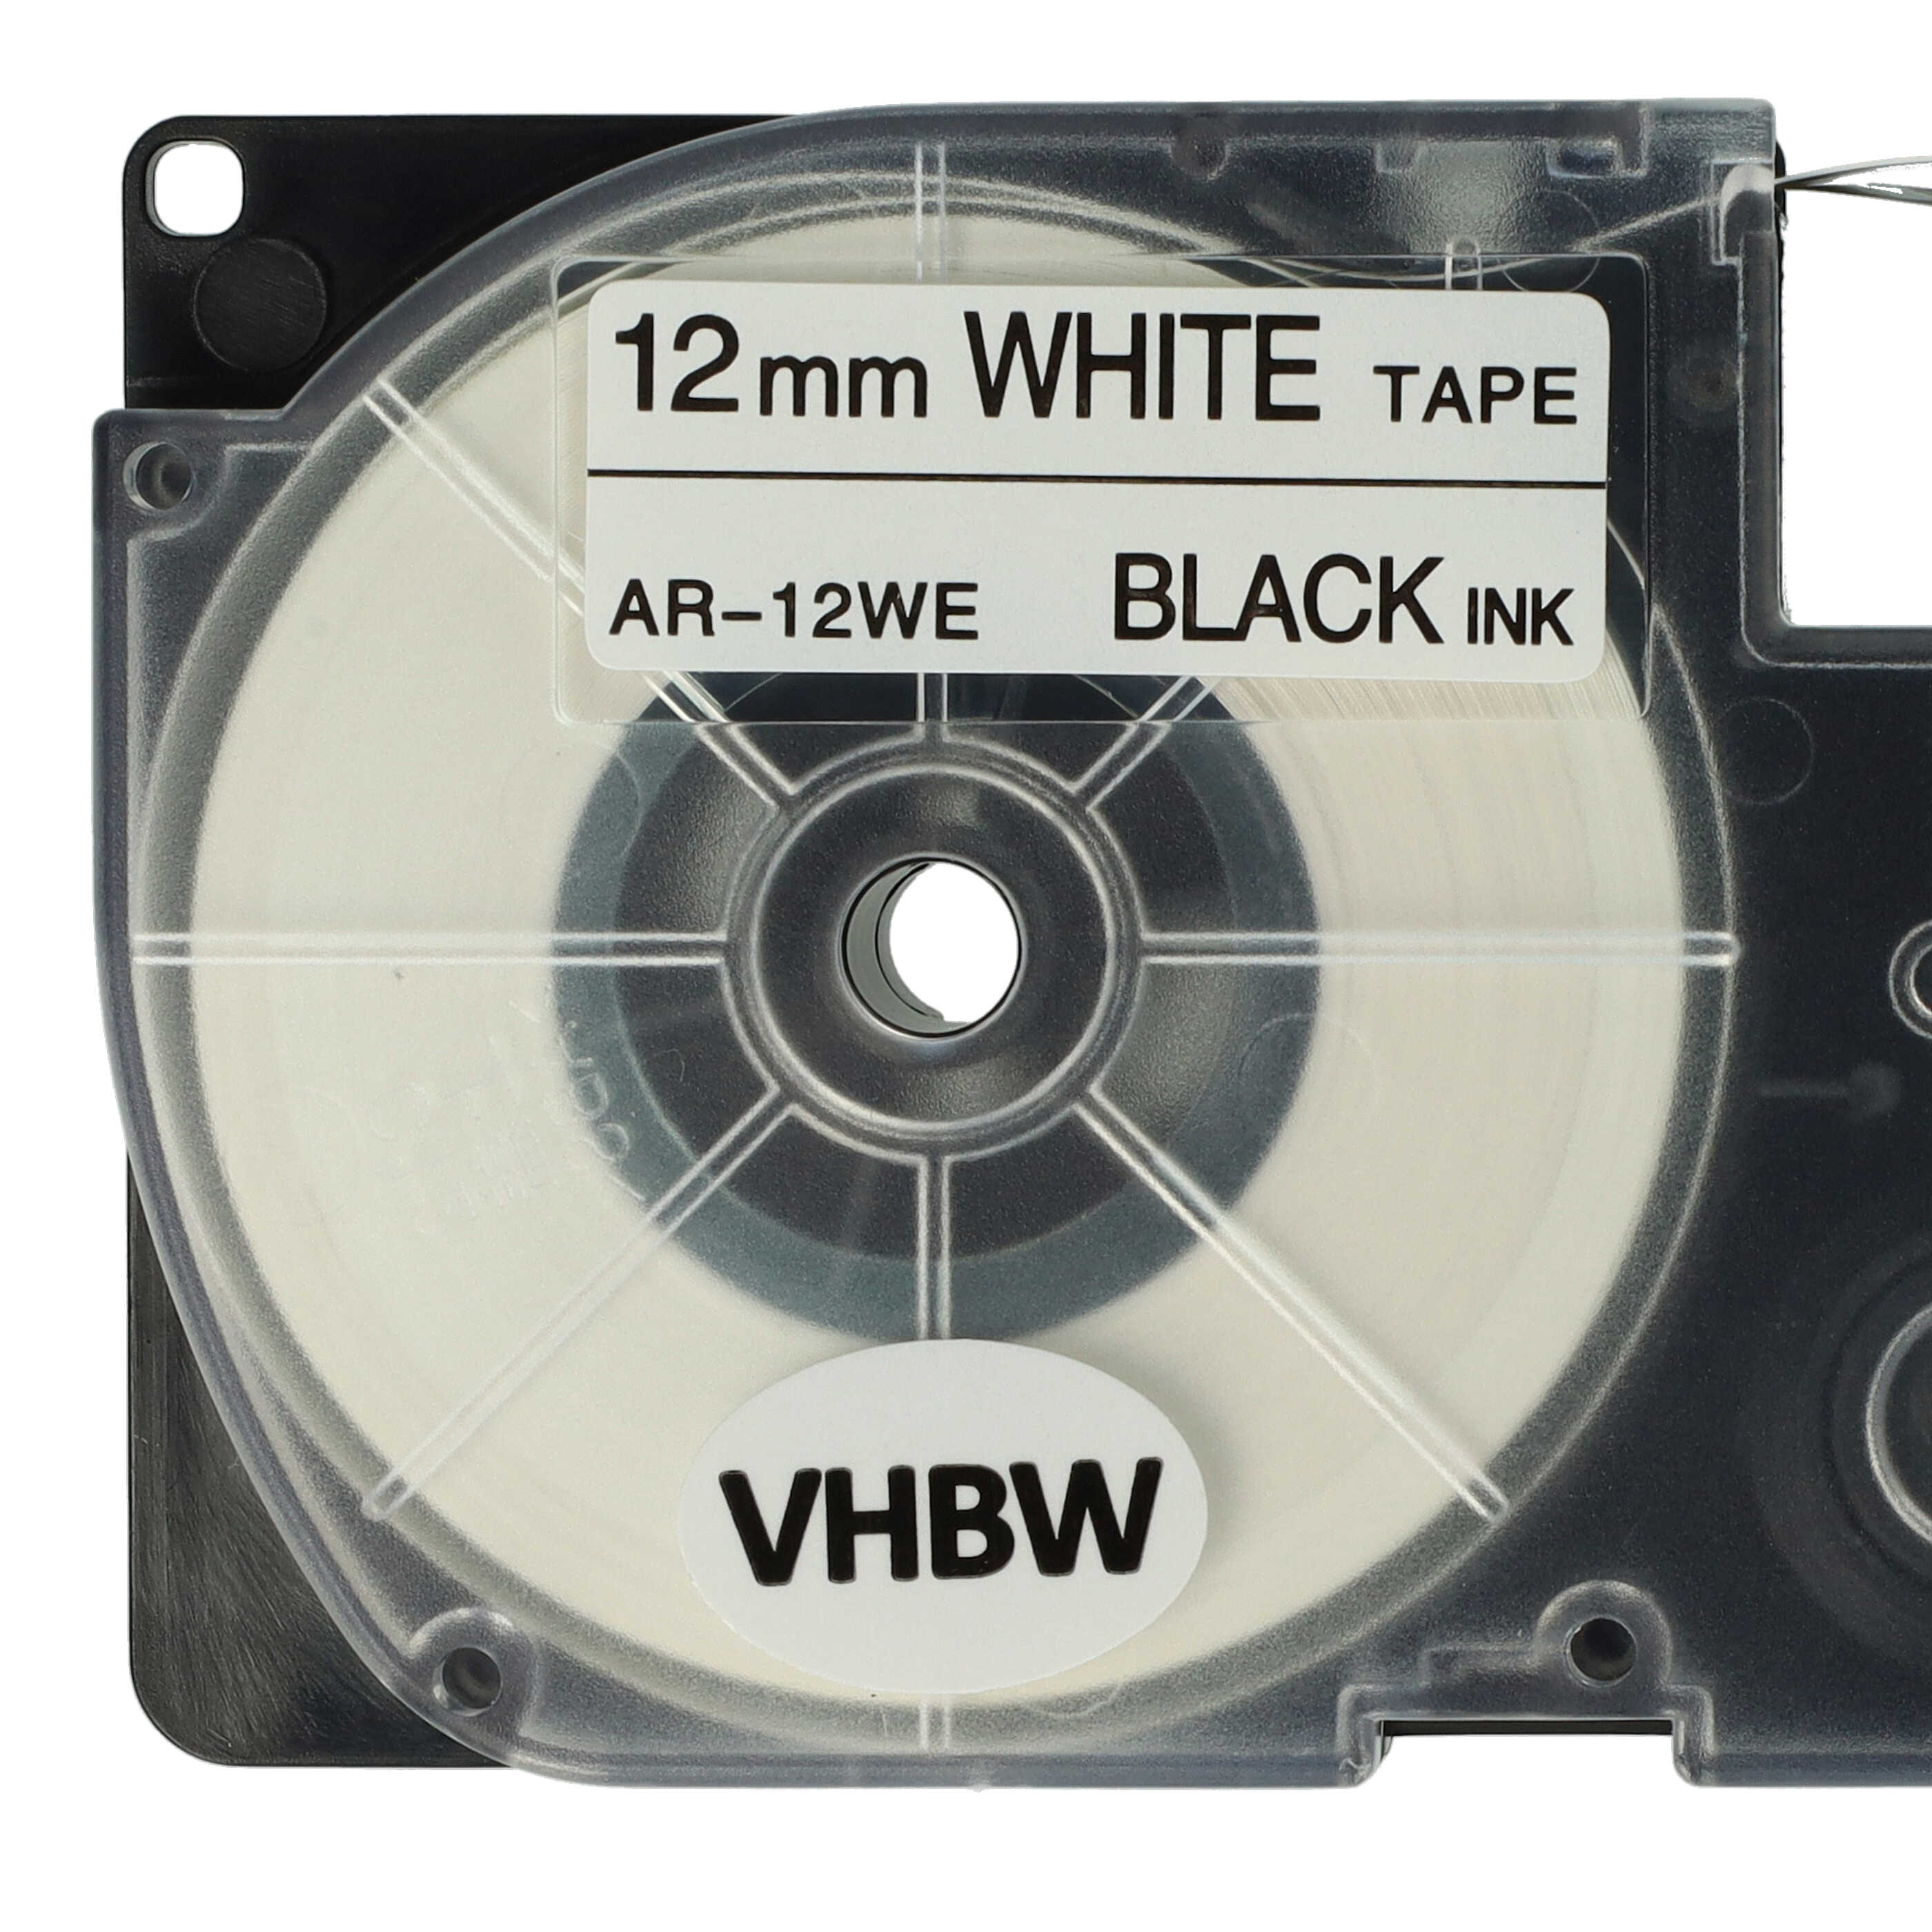 5x Label Tape as Replacement for Casio XR-12WE, XR-12WE1 - 12 mm Black to White